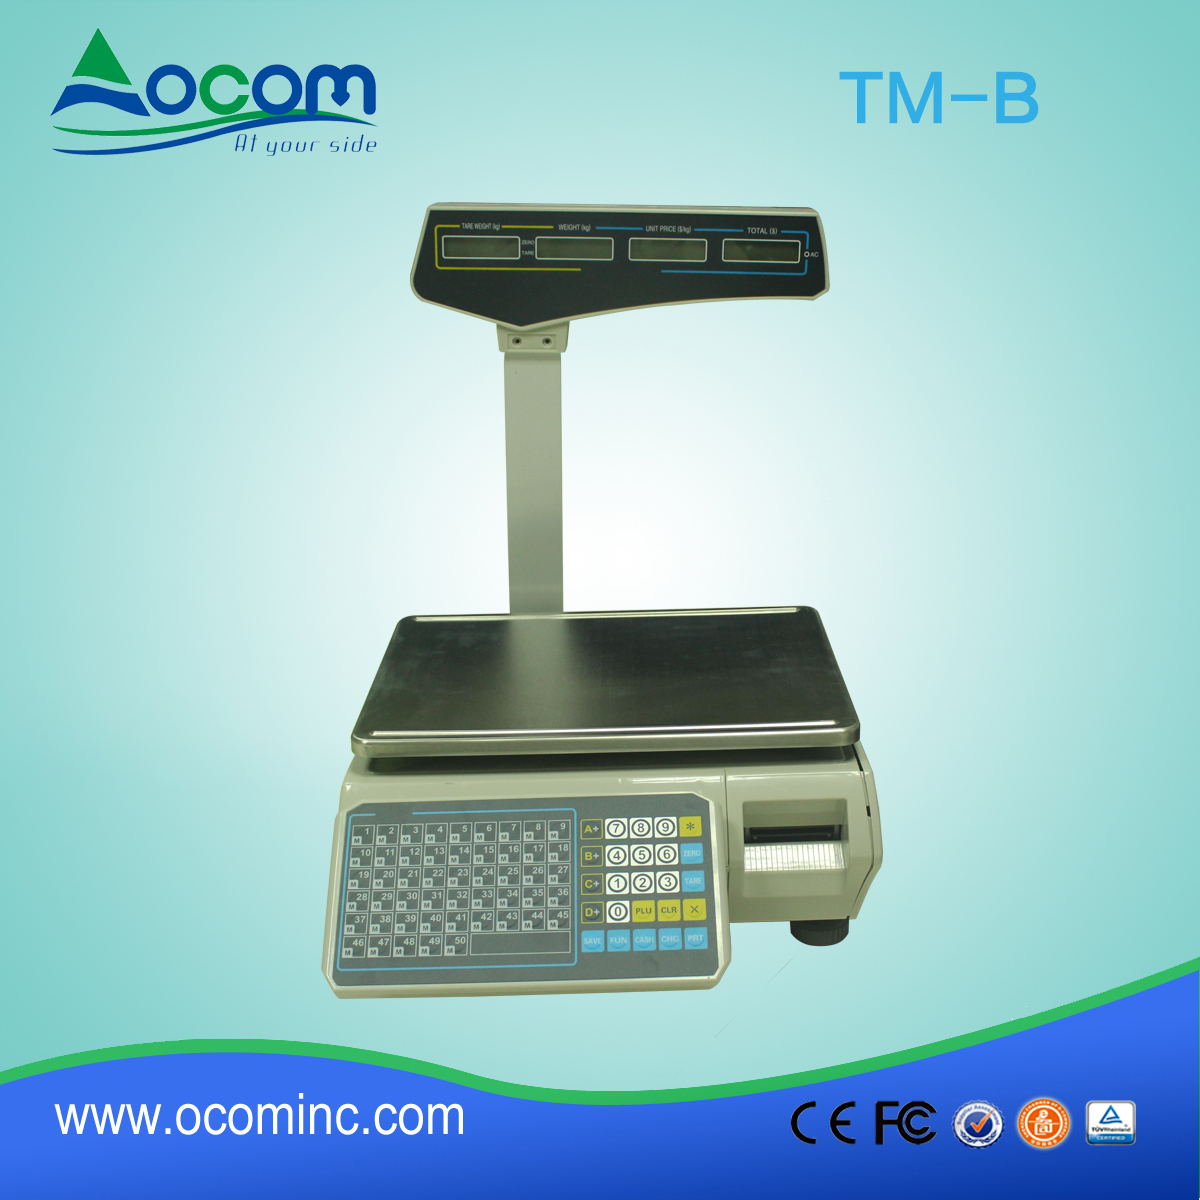 TM-B Barcode Weighing Scale with Barcode Label Printer